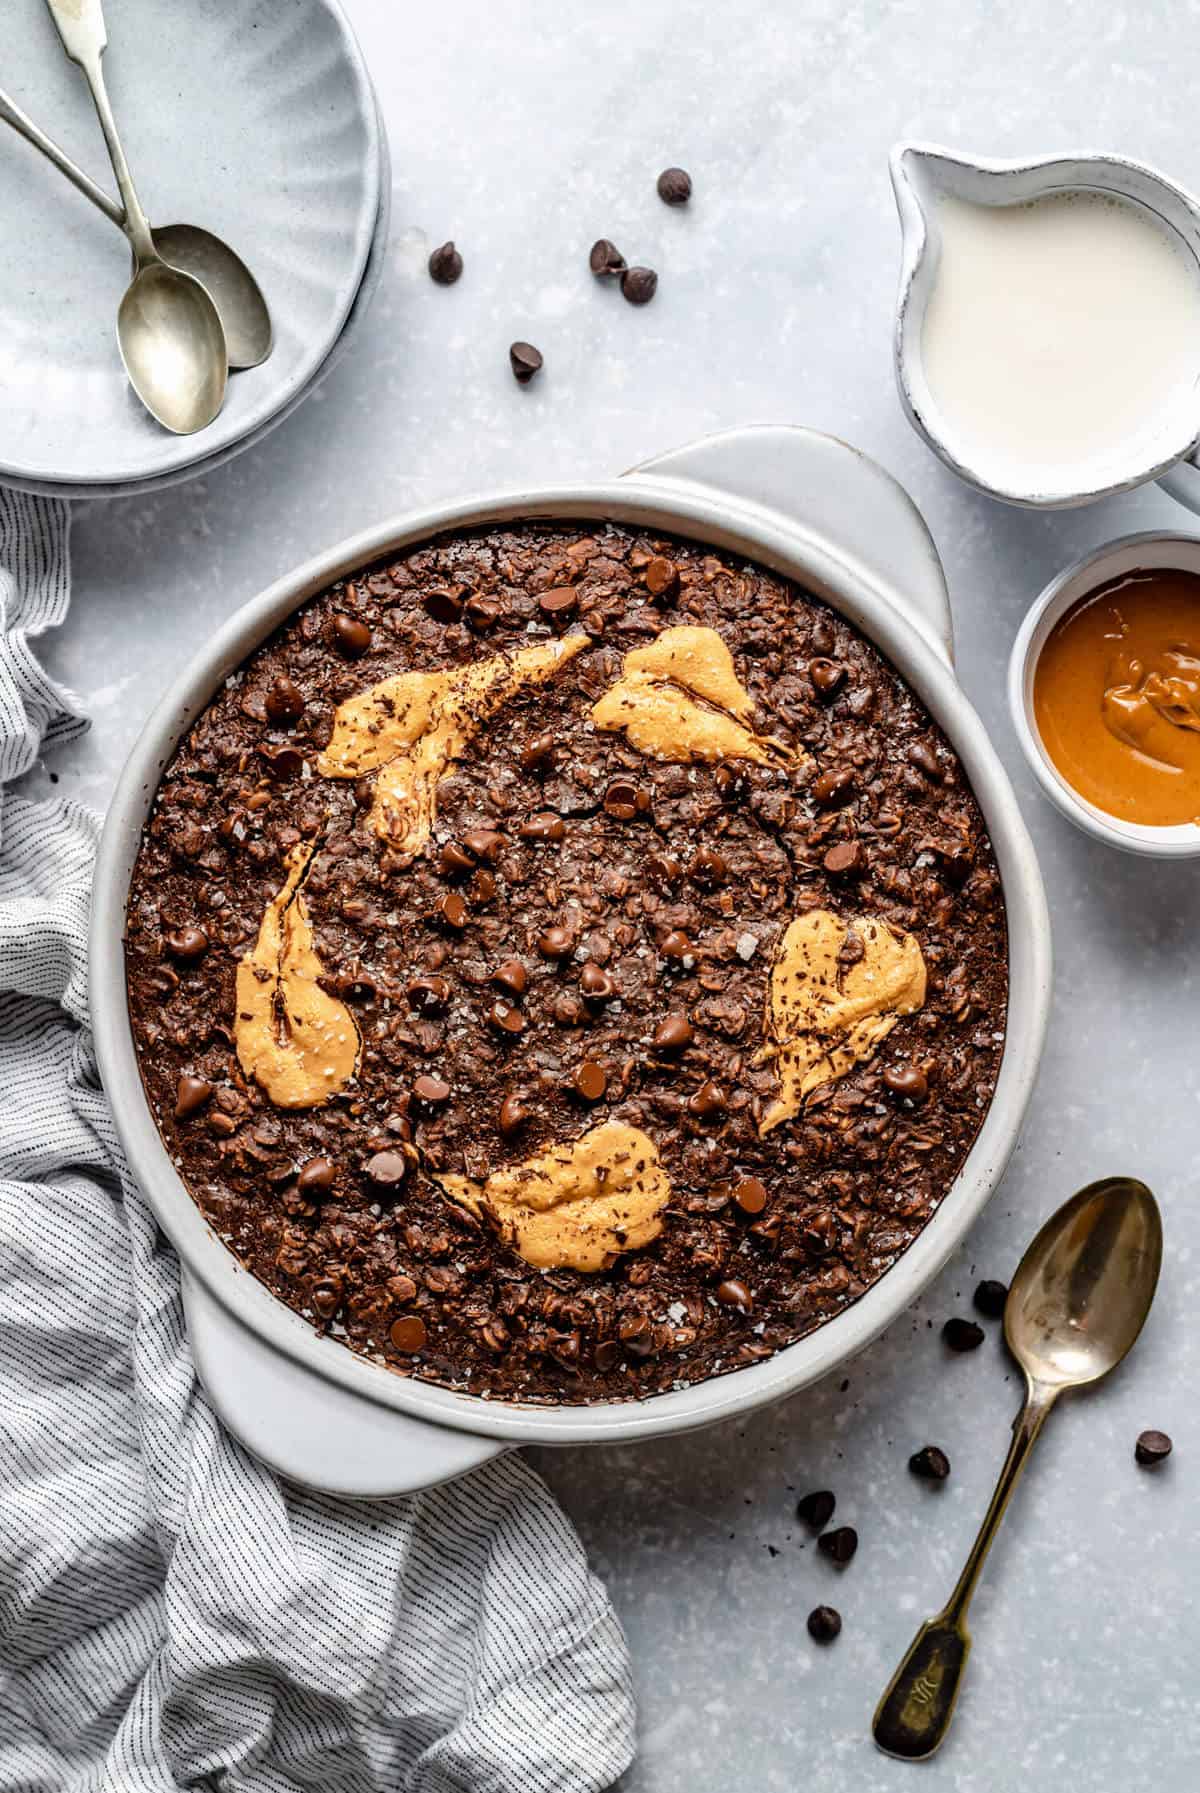 Double chocolate peanut butter baked oatmeal in a dish with a spoon, milk and peanut butter 